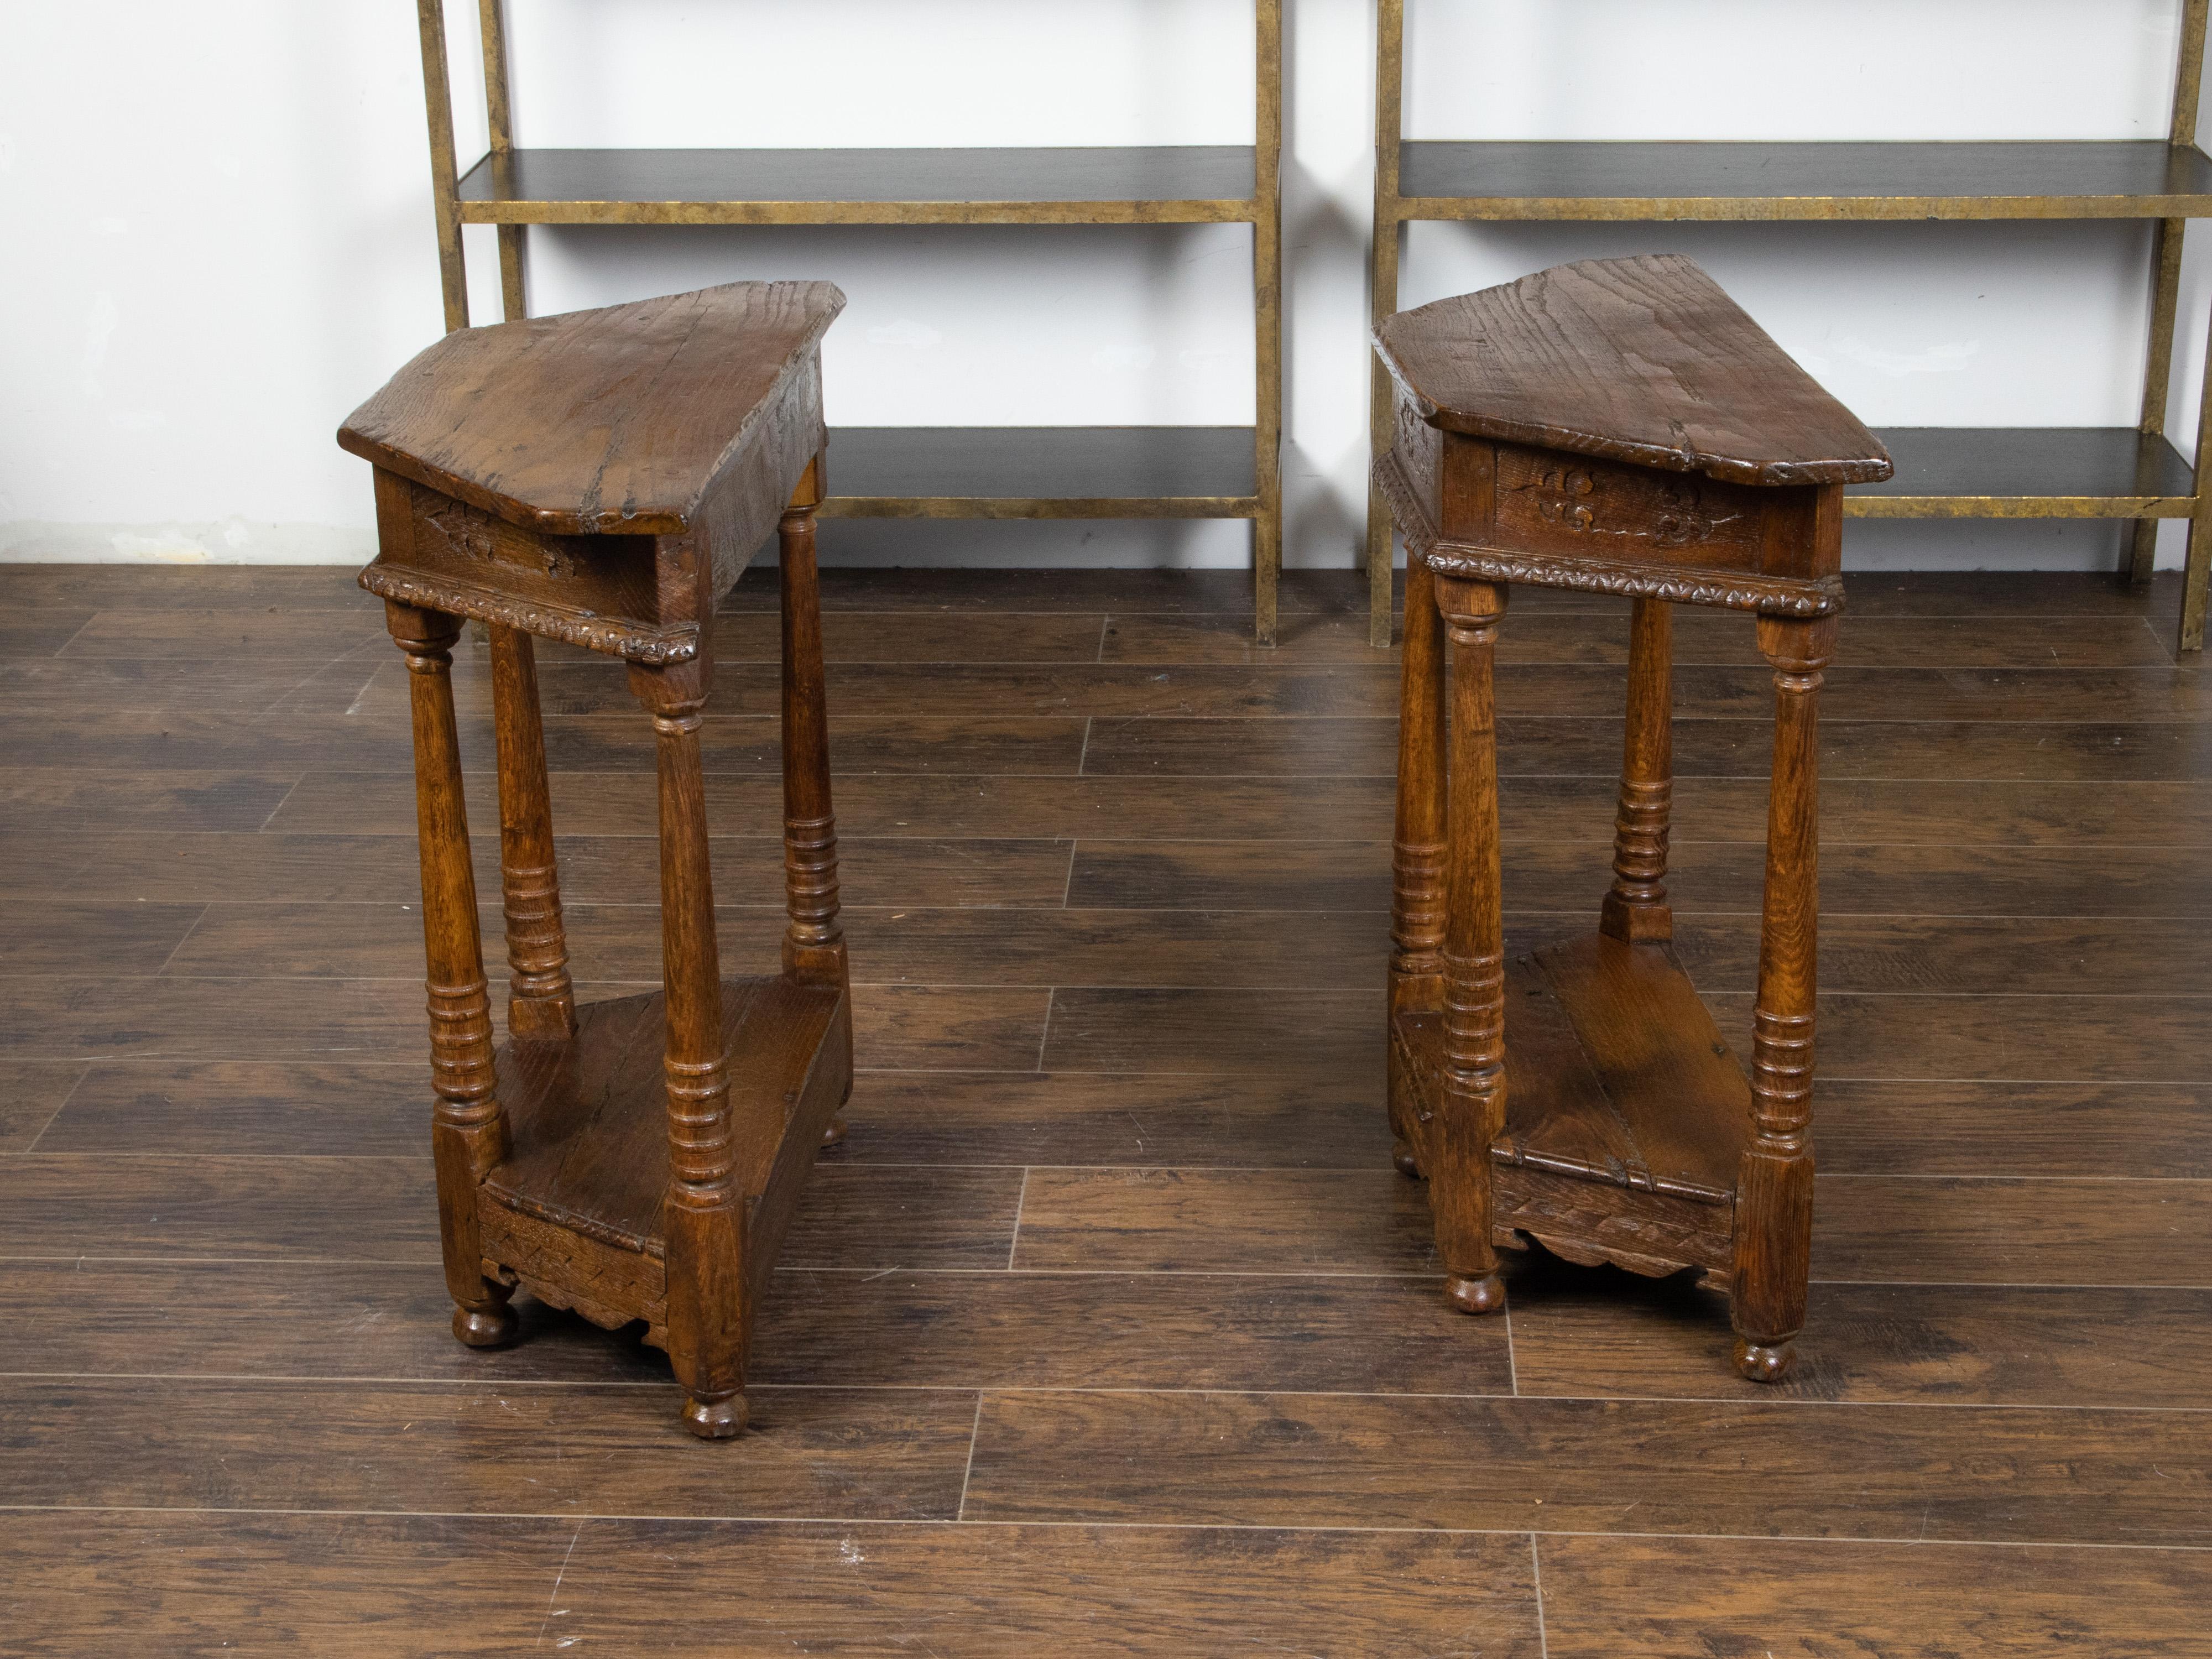 Pair of 19th Century English Carved Oak Demilune Tables with Column Legs For Sale 2